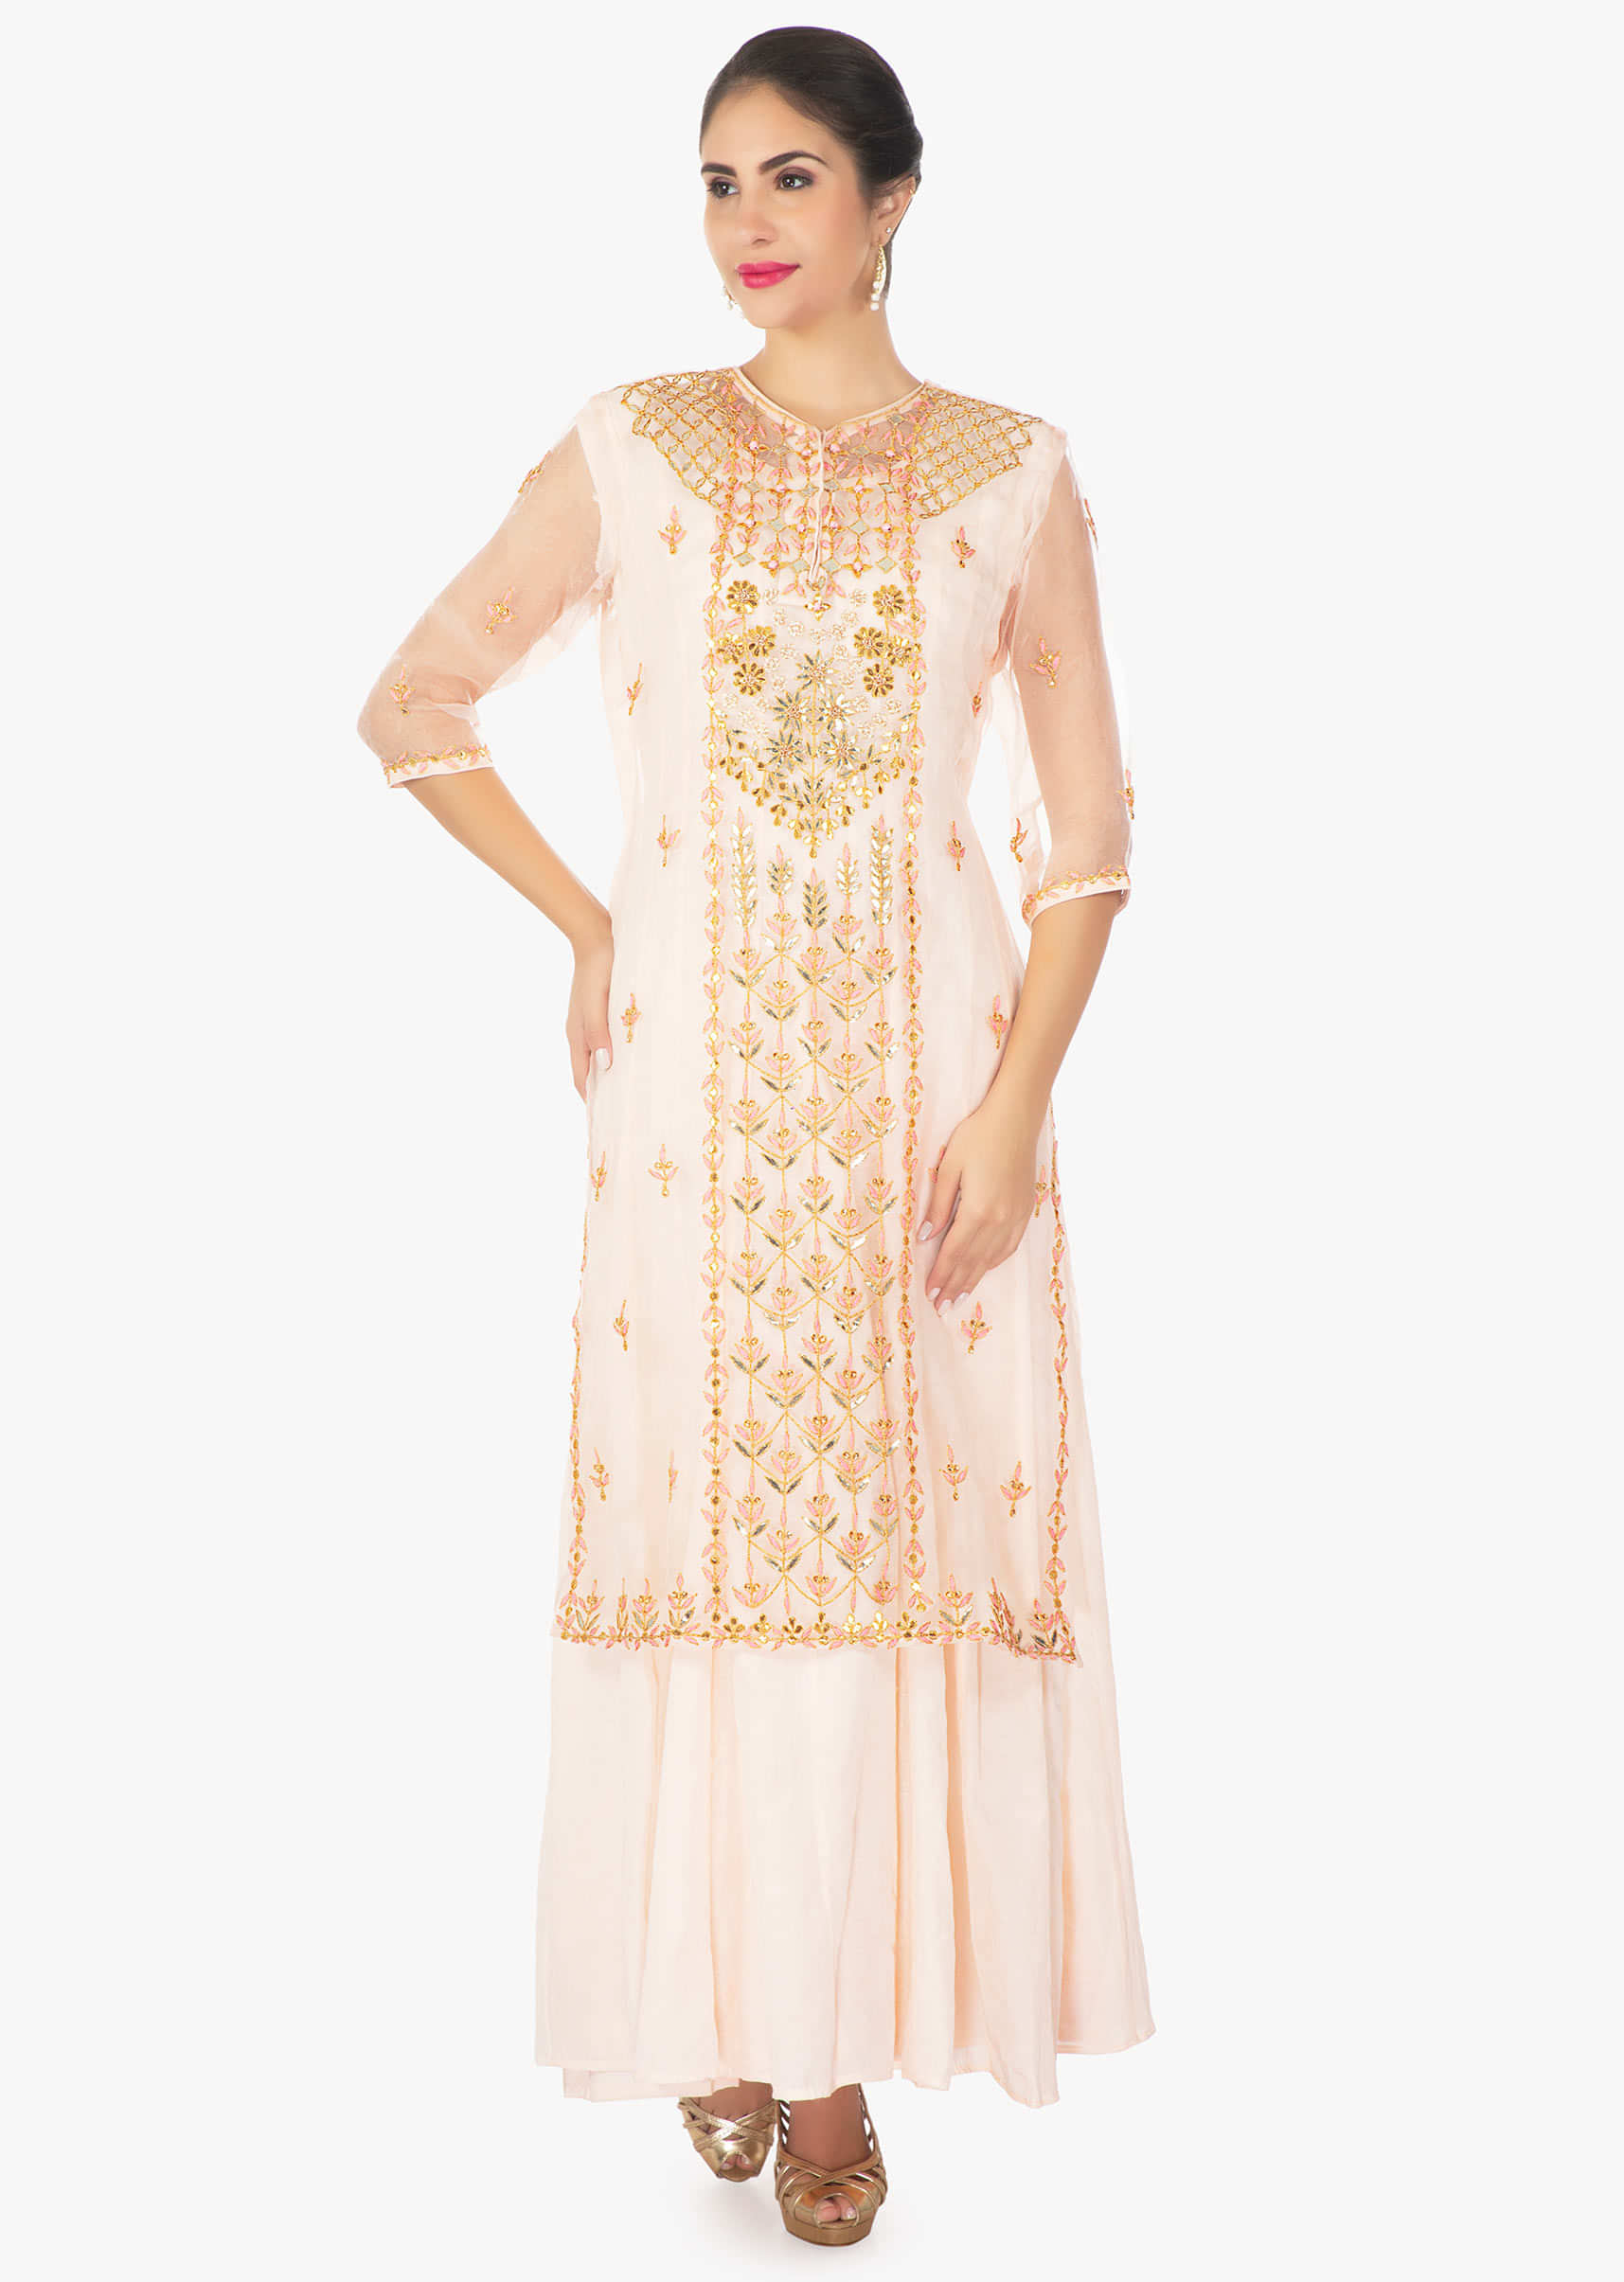 Cantaloupe peach cotton inners with organza top in gotta lace and resham